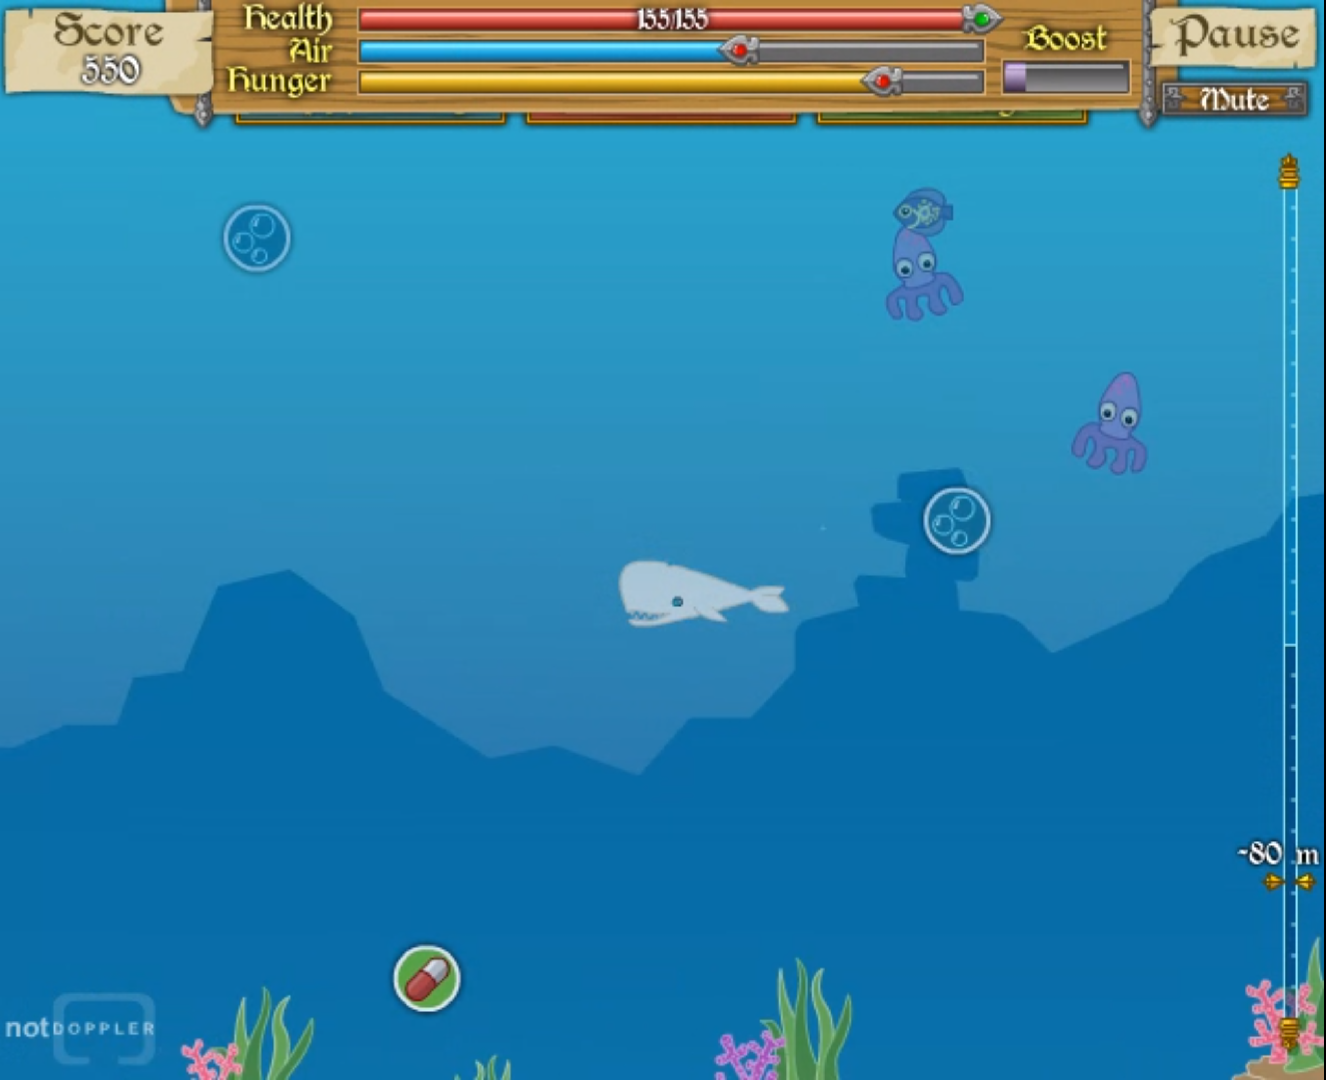 Moby Dick: The Video Game